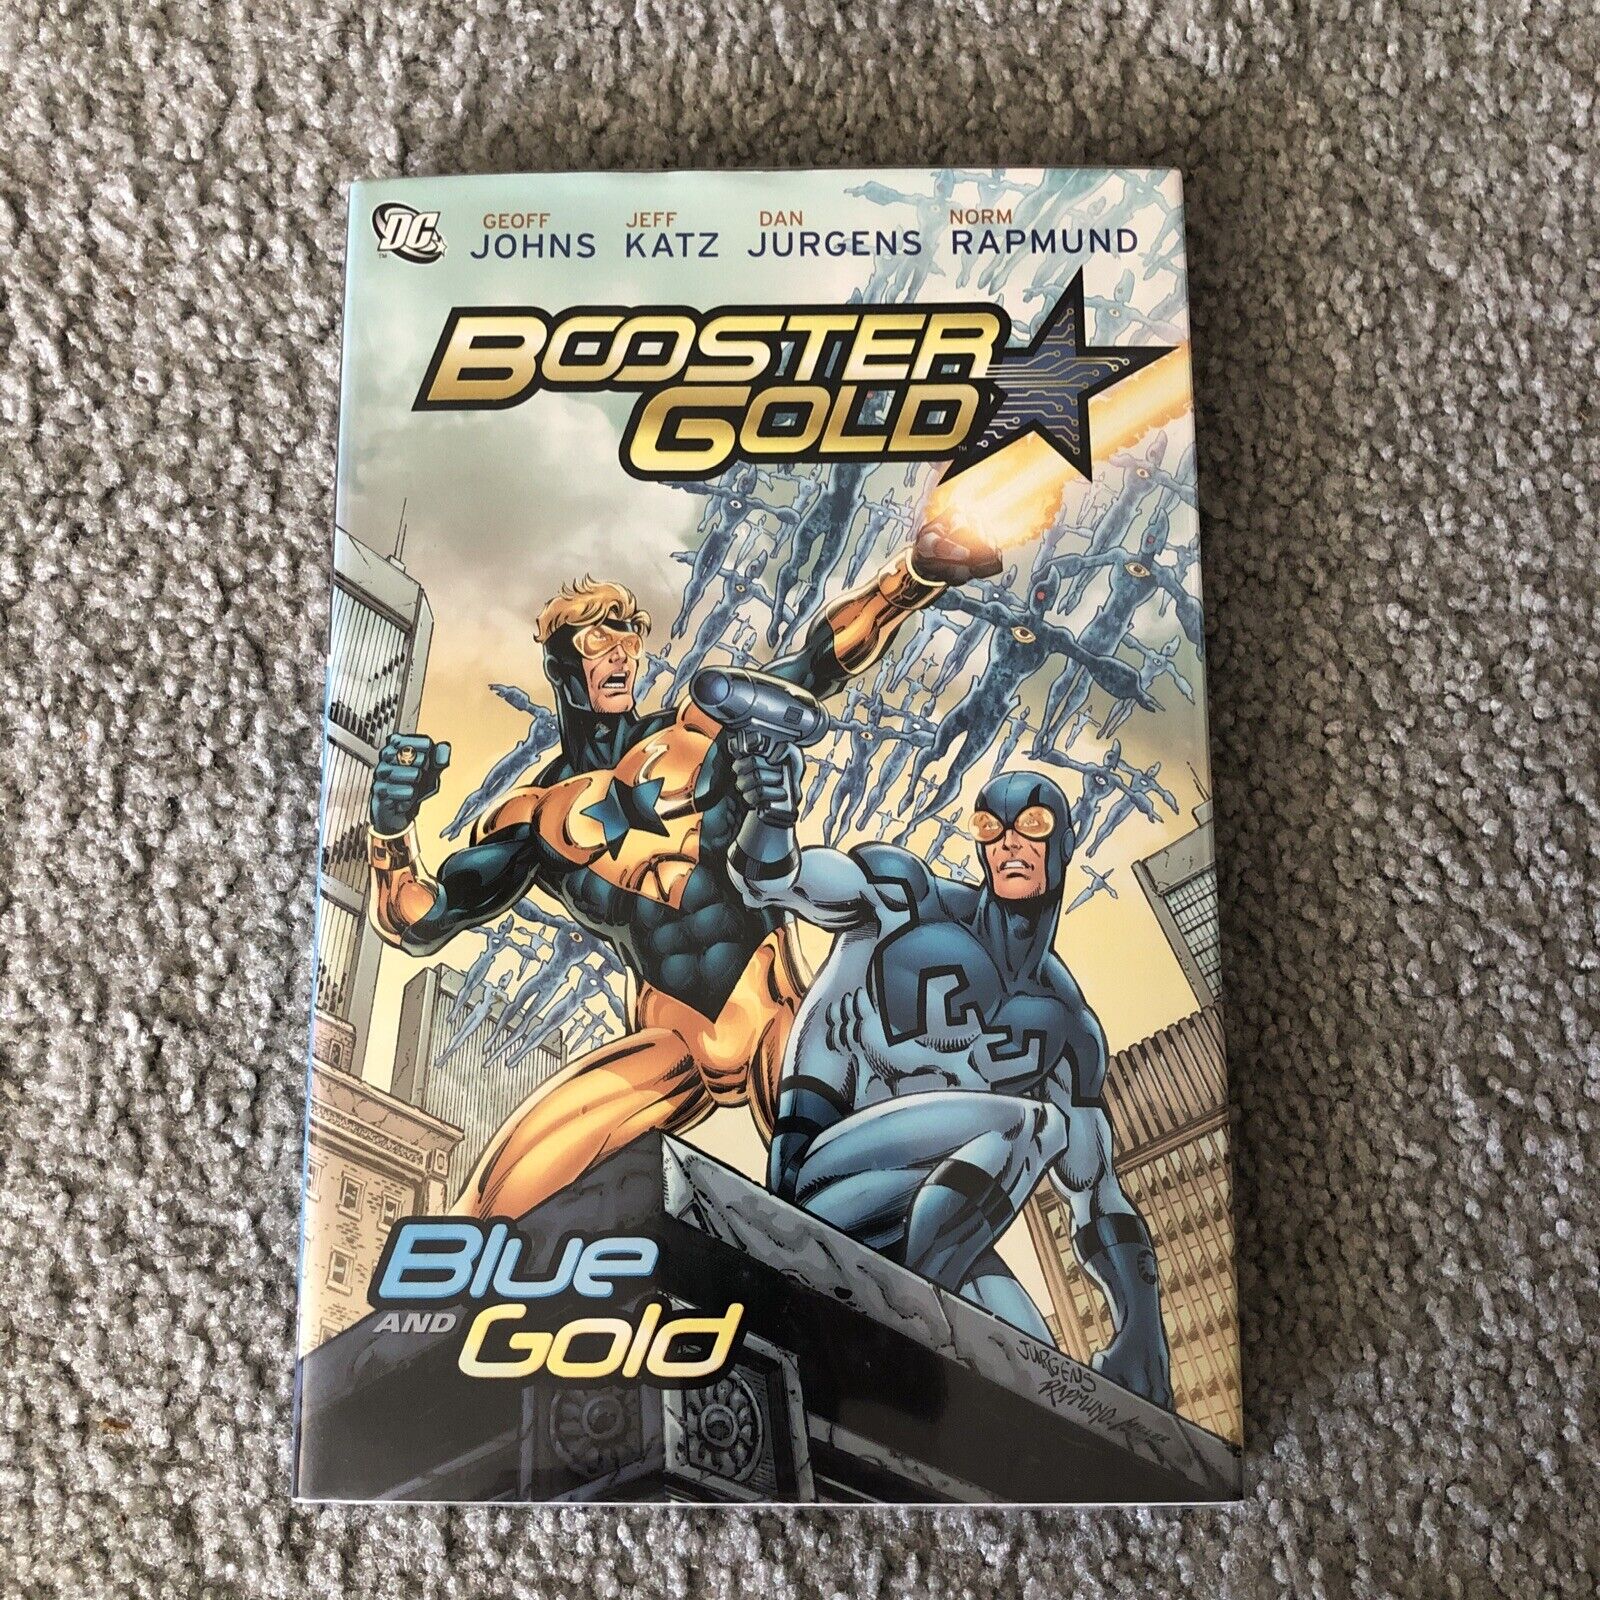 Booster Gold Vol. 2 (DC Comics, 2008 January 2009) Hardcover